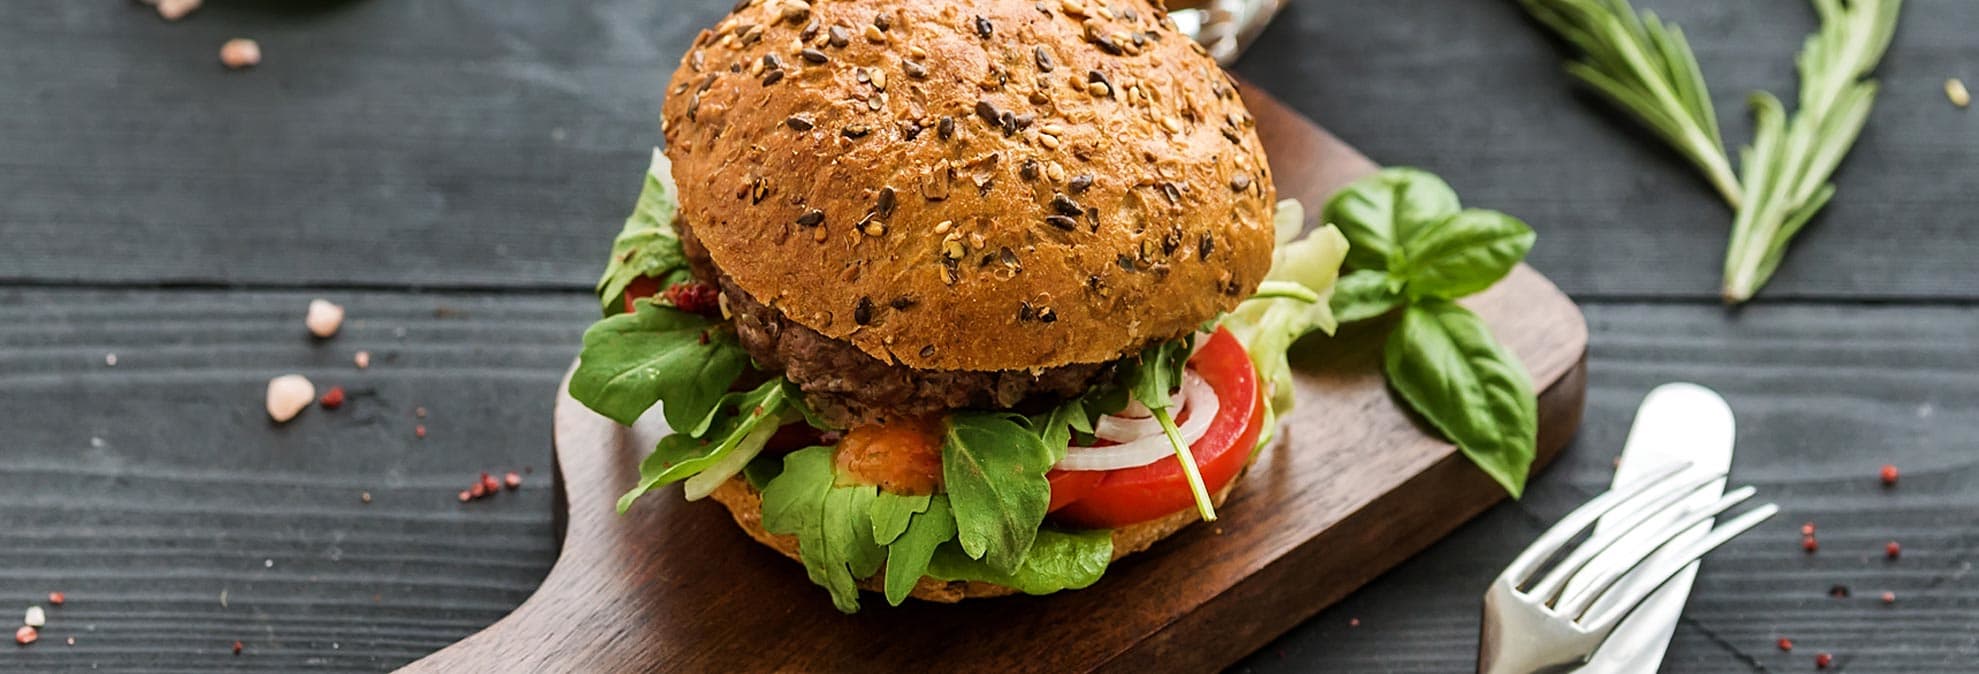 How to Build a Healthy Burger - Consumer Reports